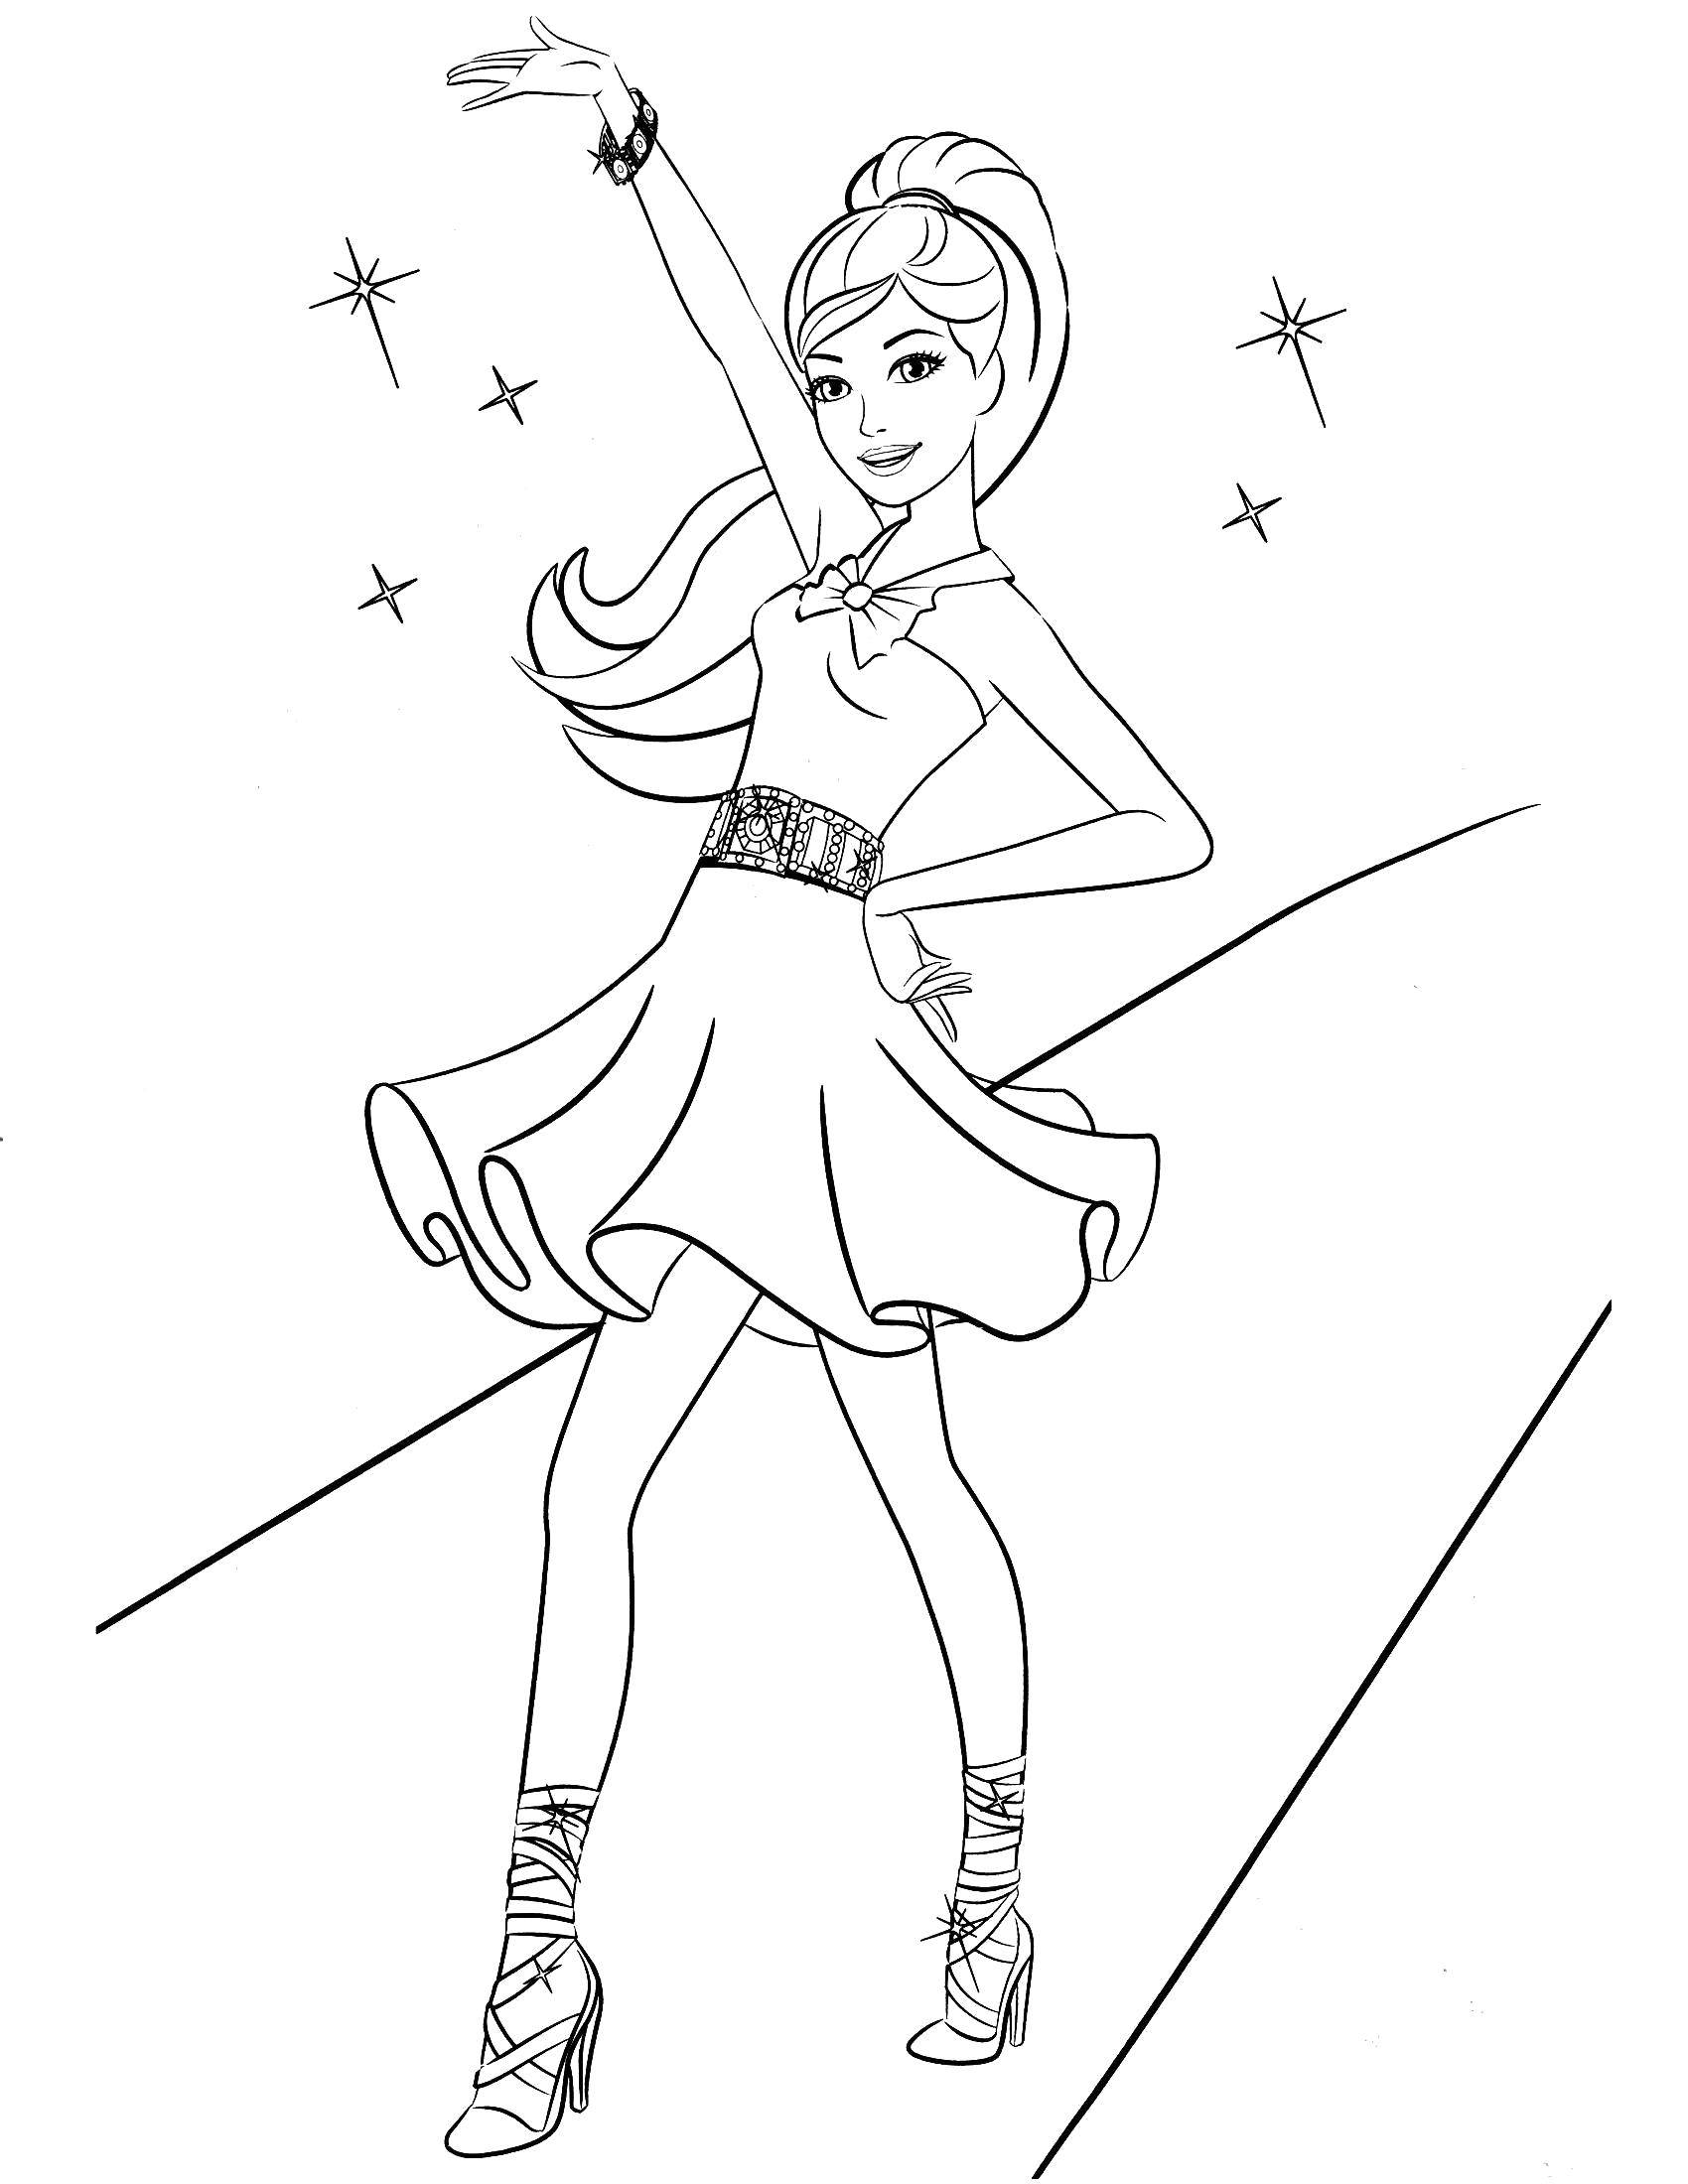 Coloring Dancing Barbie. Category Dress. Tags:  Clothing, dress.